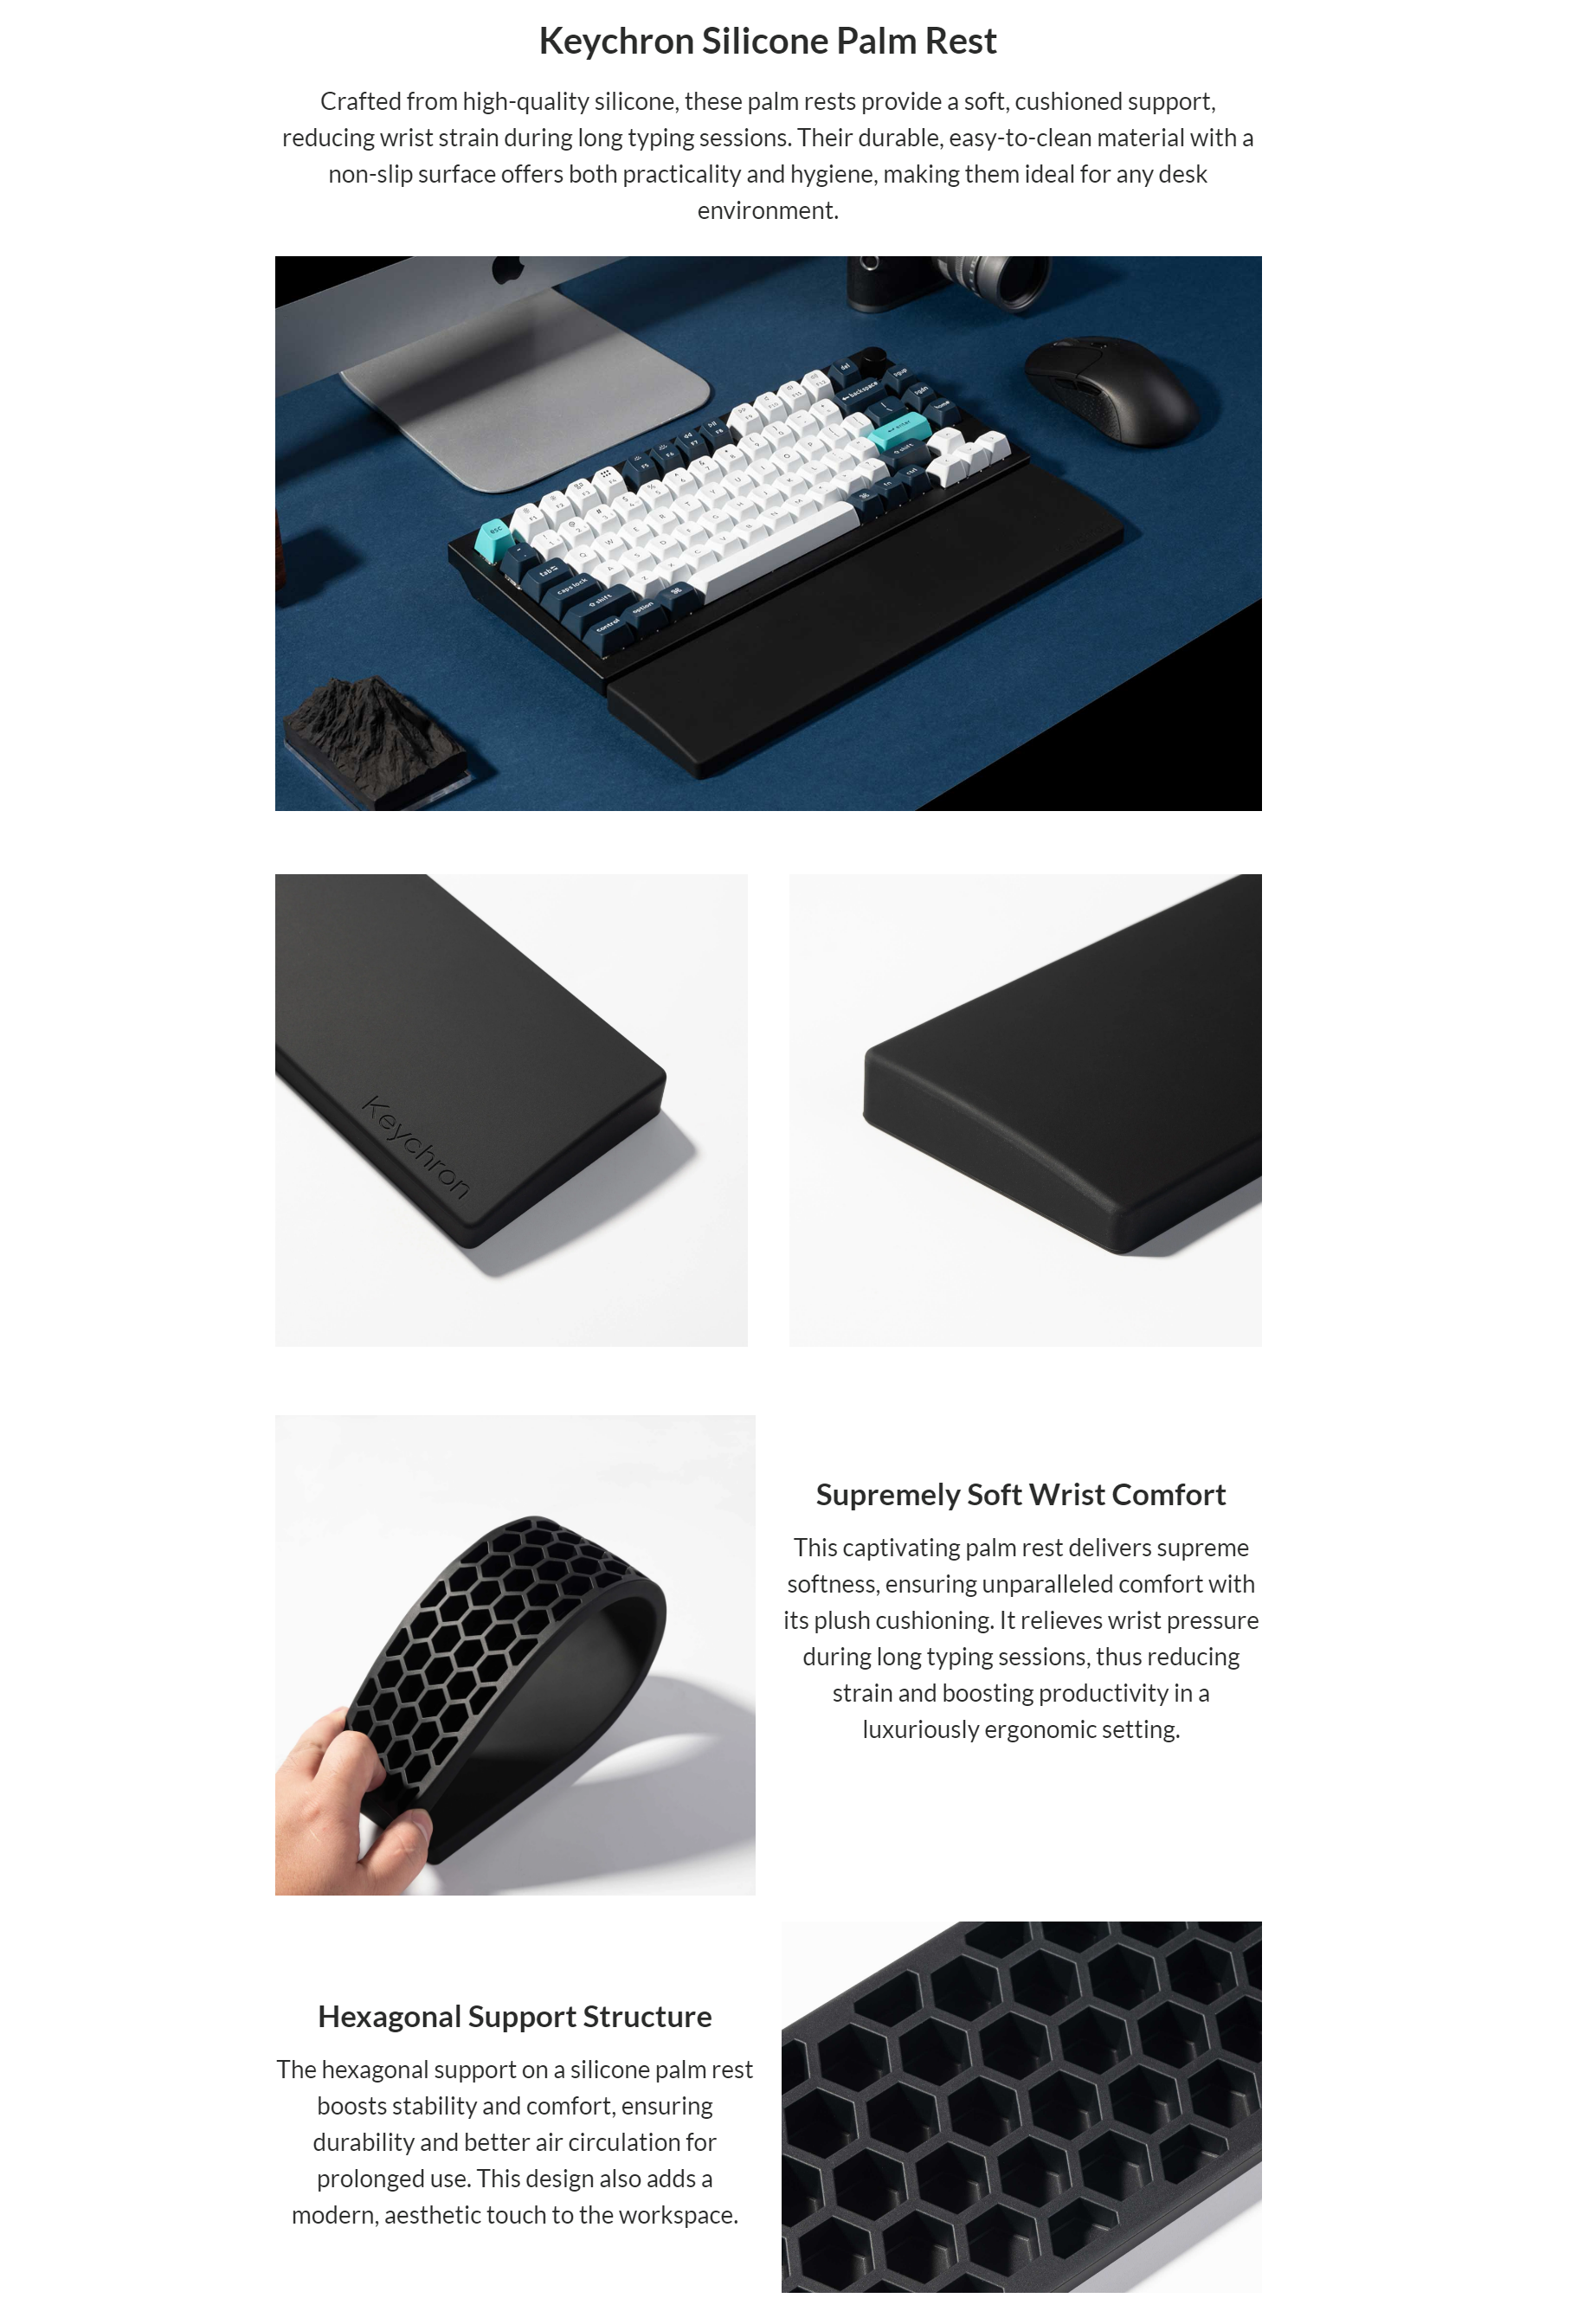 A large marketing image providing additional information about the product Keychron PR45 Silicone Palm Rest - Additional alt info not provided